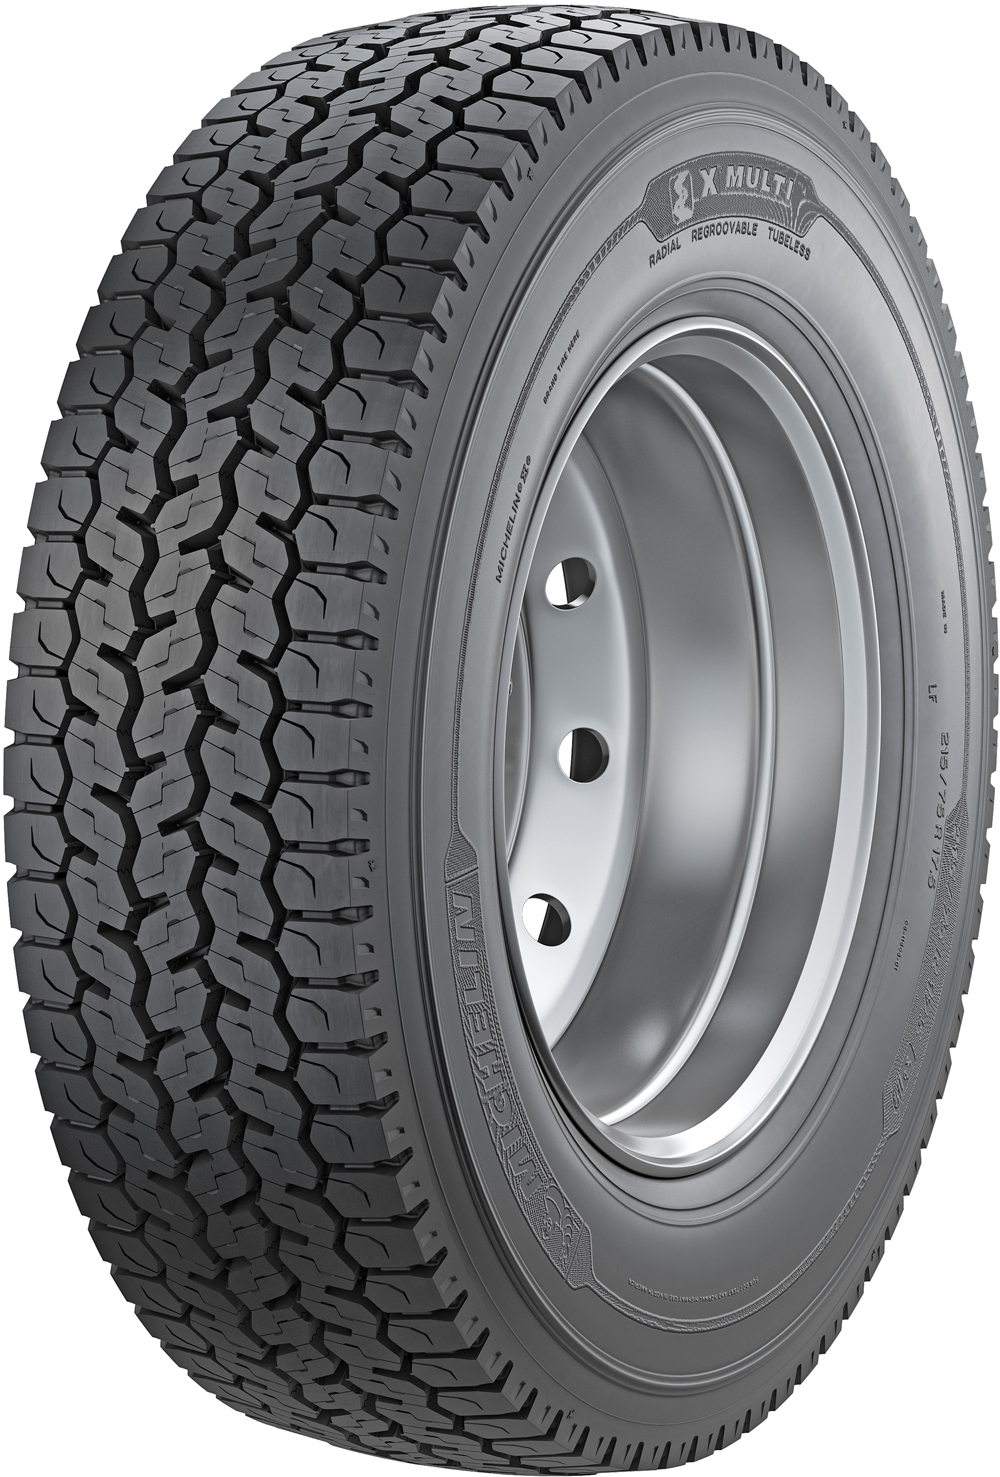 product_type-heavy_tires MICHELIN X MULTI D VG 235/75 R17.5 132M